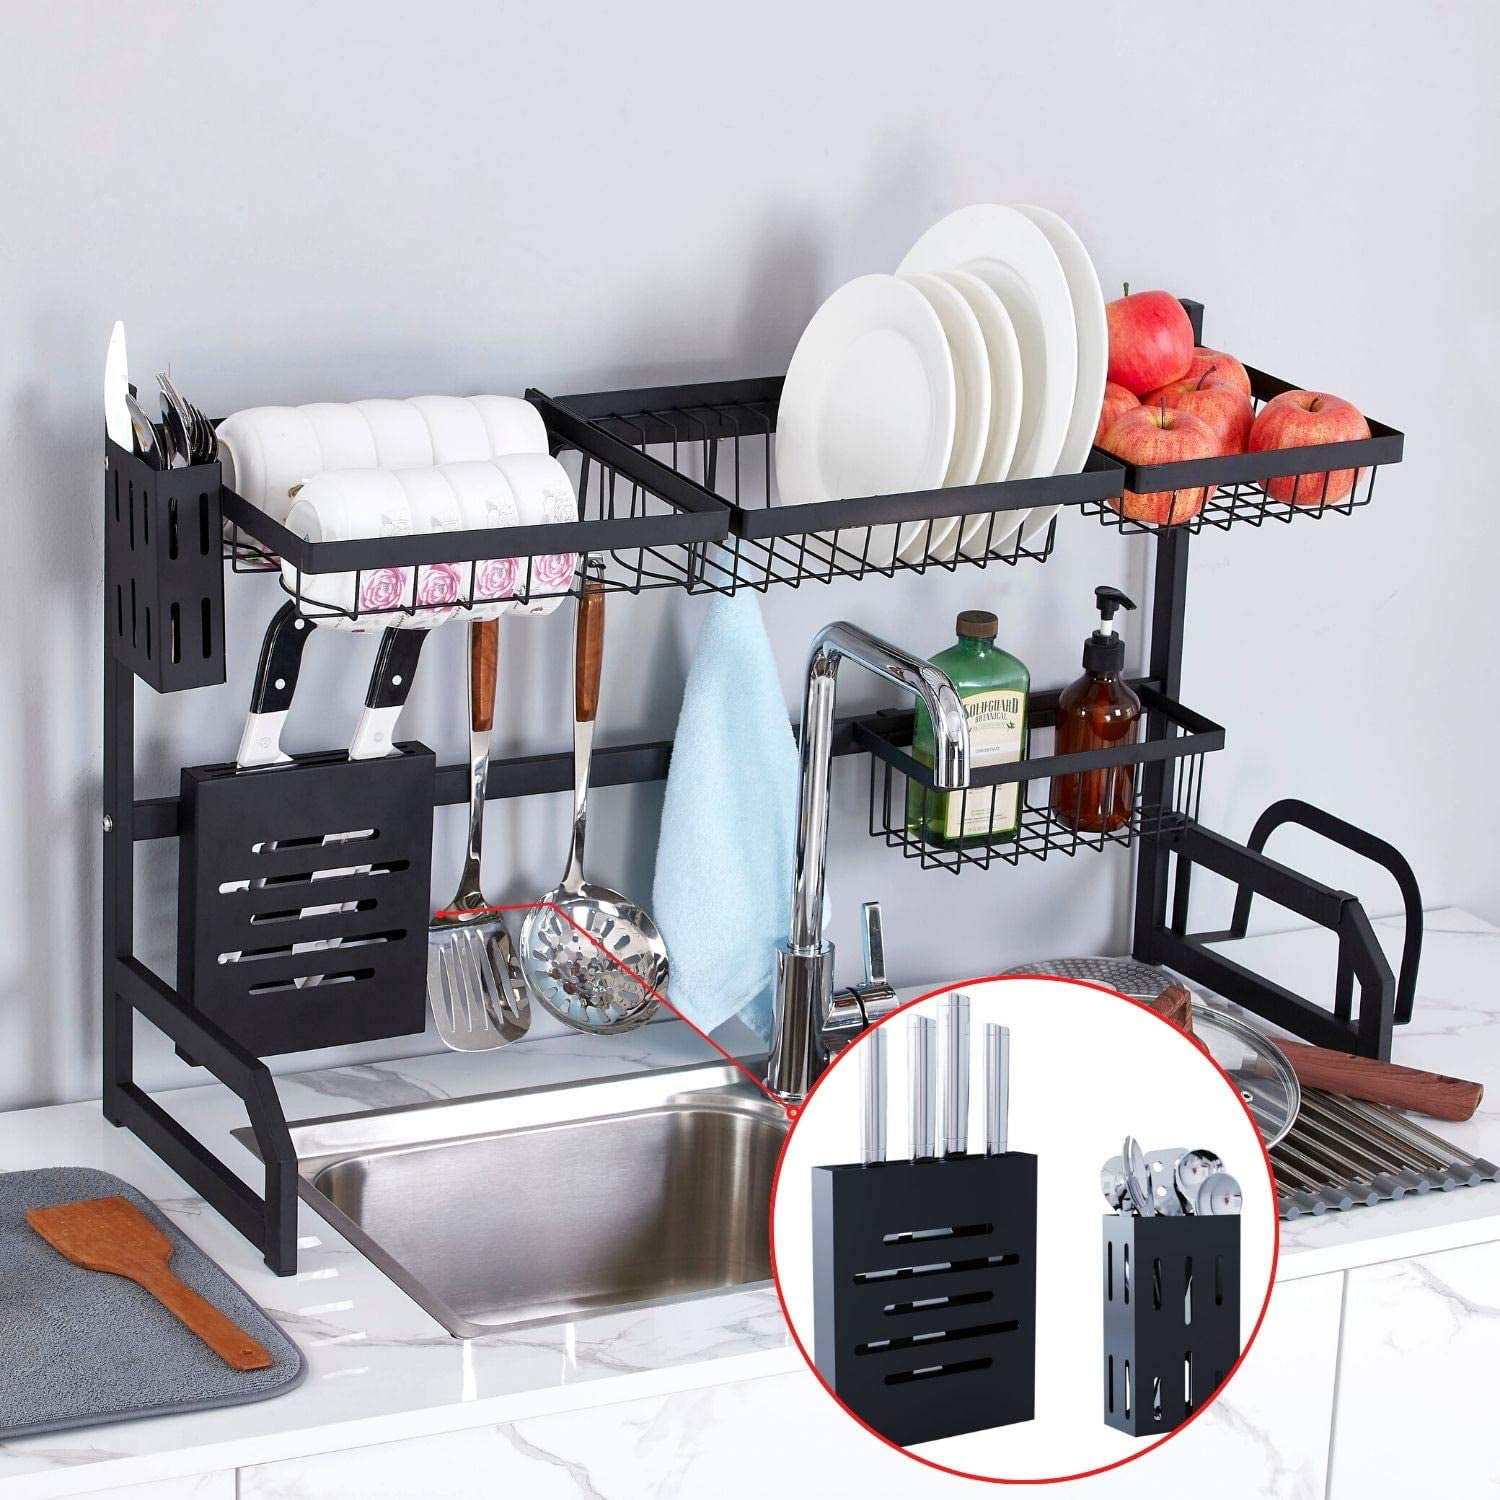 Details about   Large Stainless Steel Dish Rack Over Sink Drain Drying Holder Shelf Organizer US 